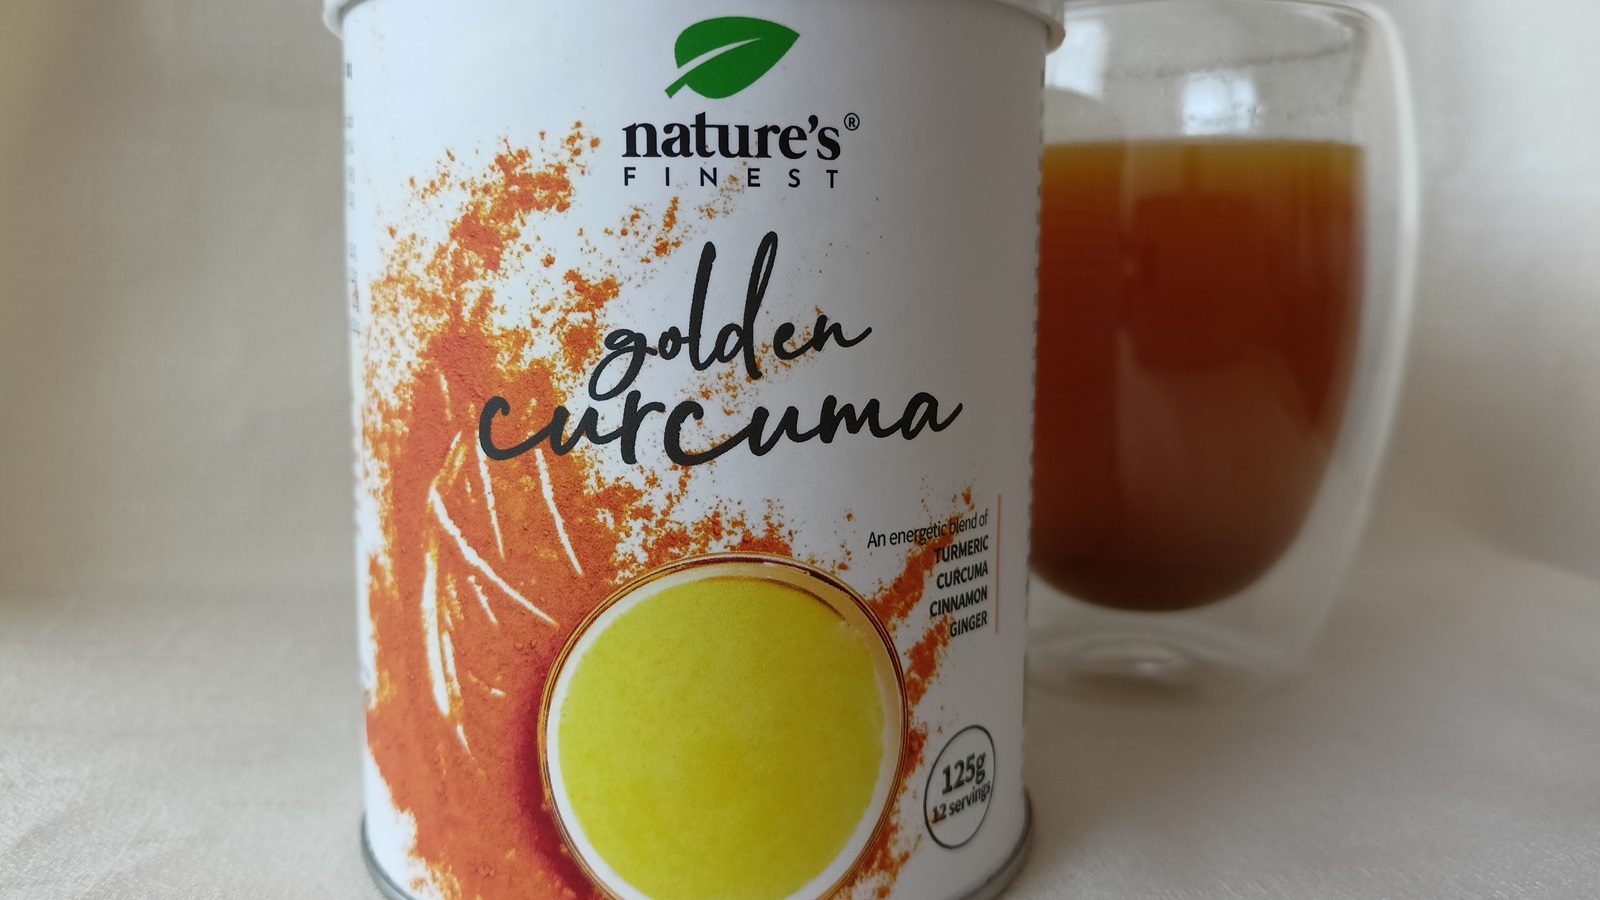 Review: We tried Golden Curcuma Herbal Latte by Nature’s Finest